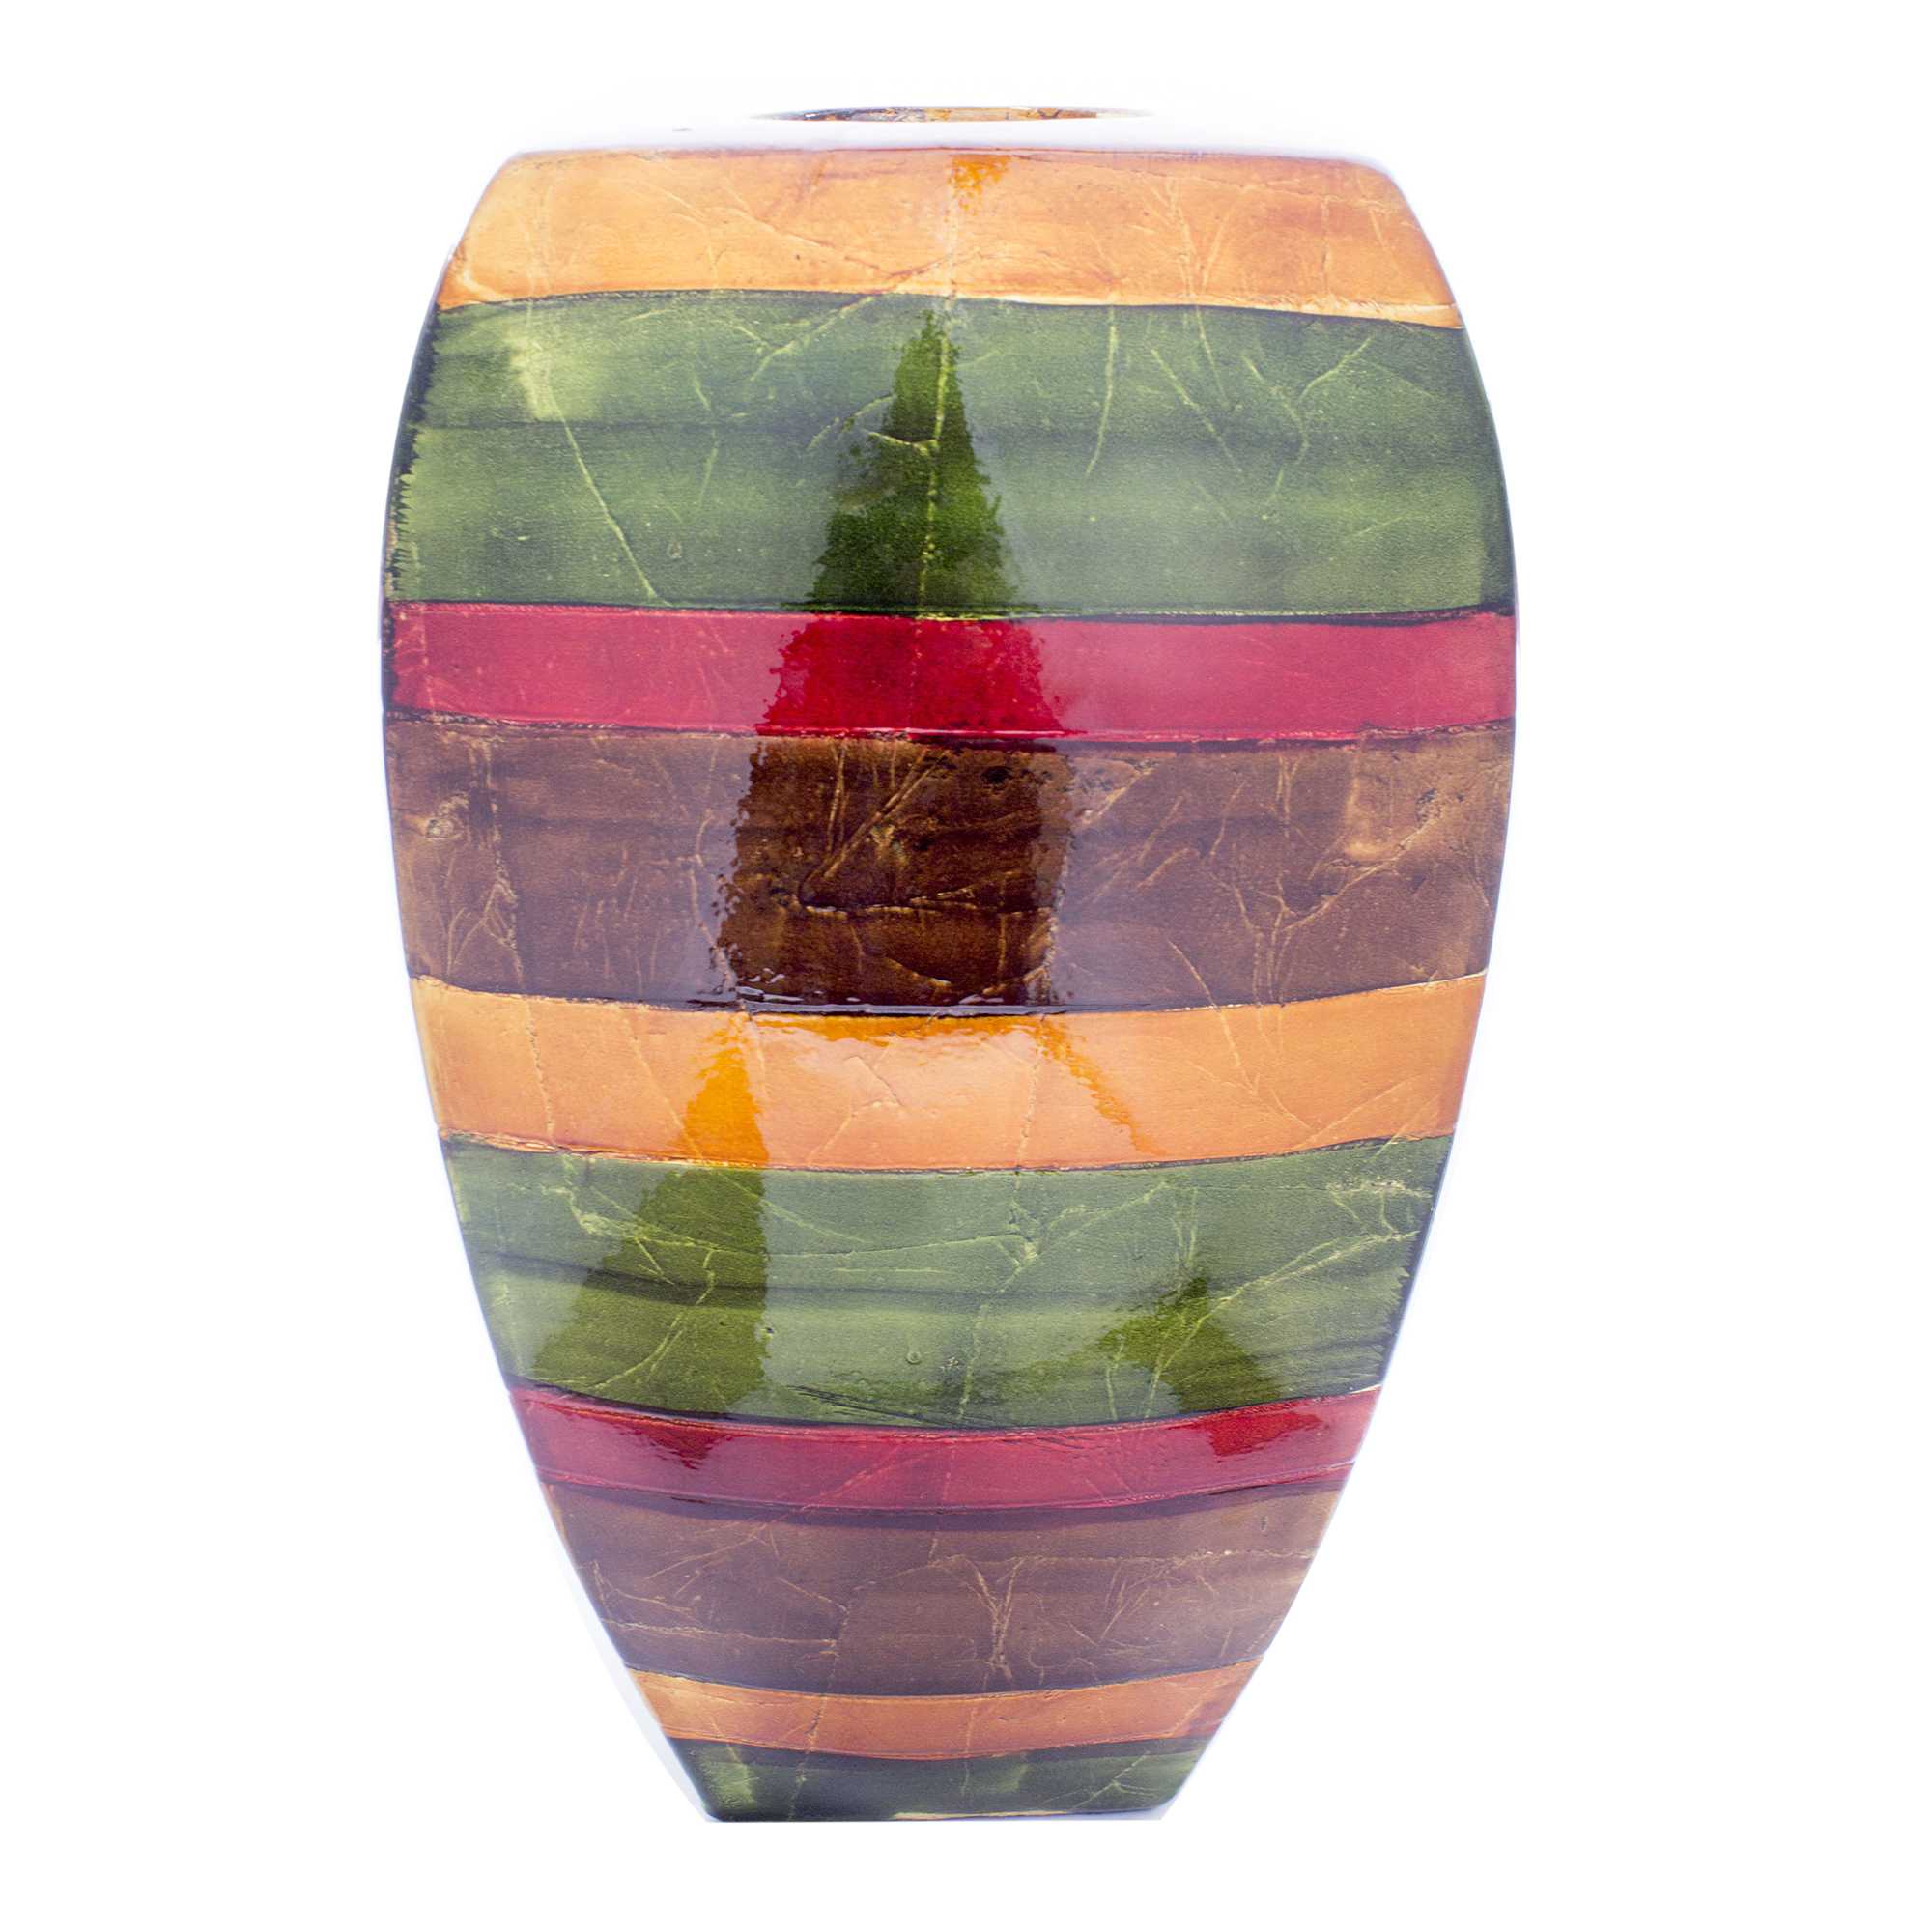 10" X 6.75" X 17.75" Green Red Brown Copper Ceramic Lacquered Striped Modern Vase